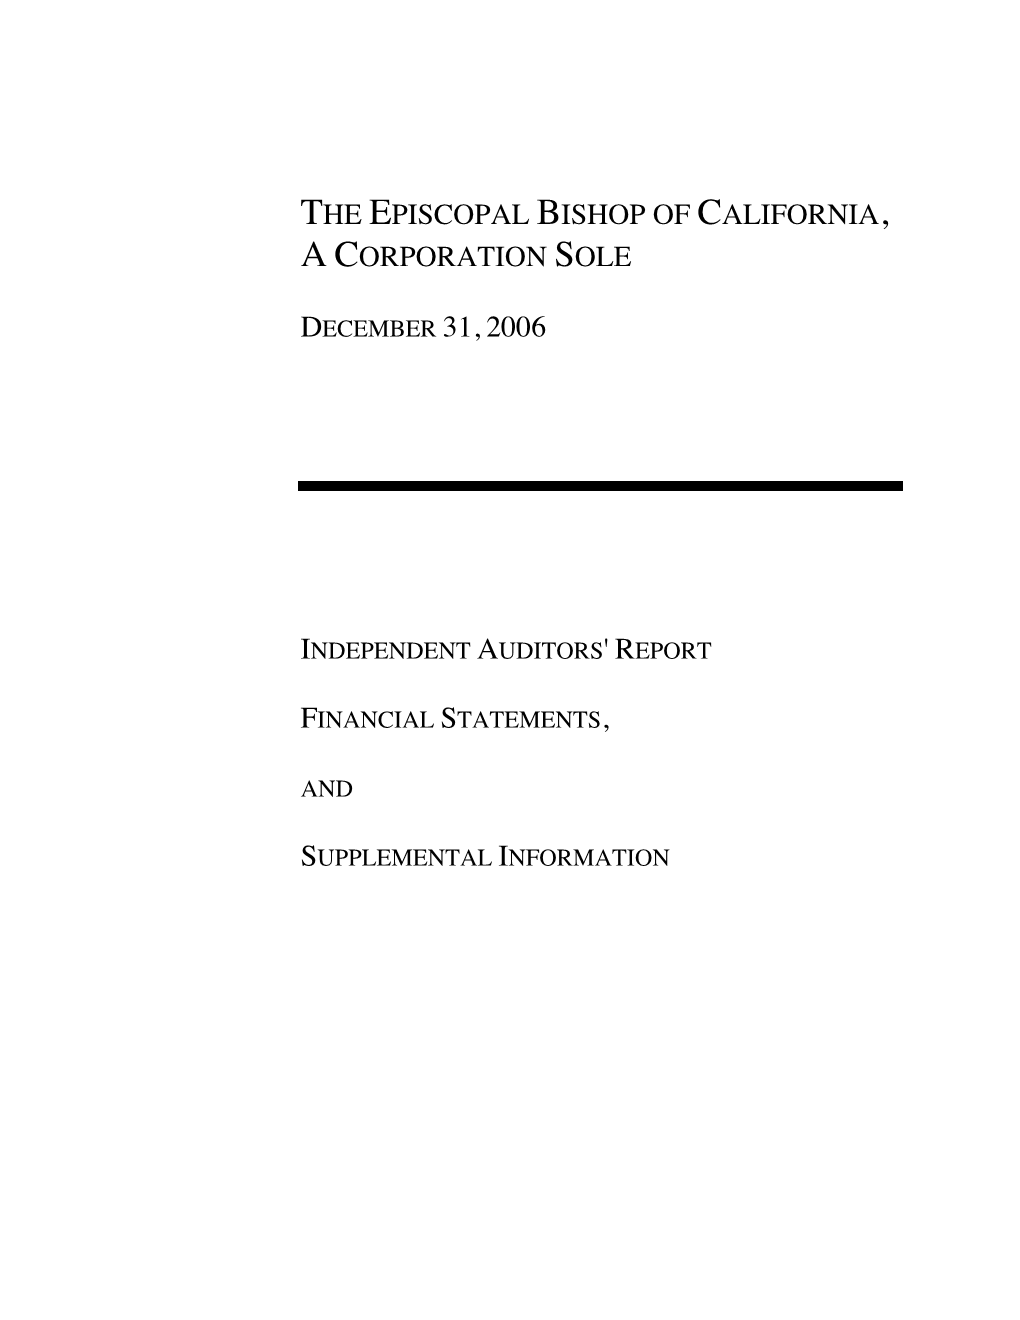 The Episcopal Bishop of California, a Corporation Sole